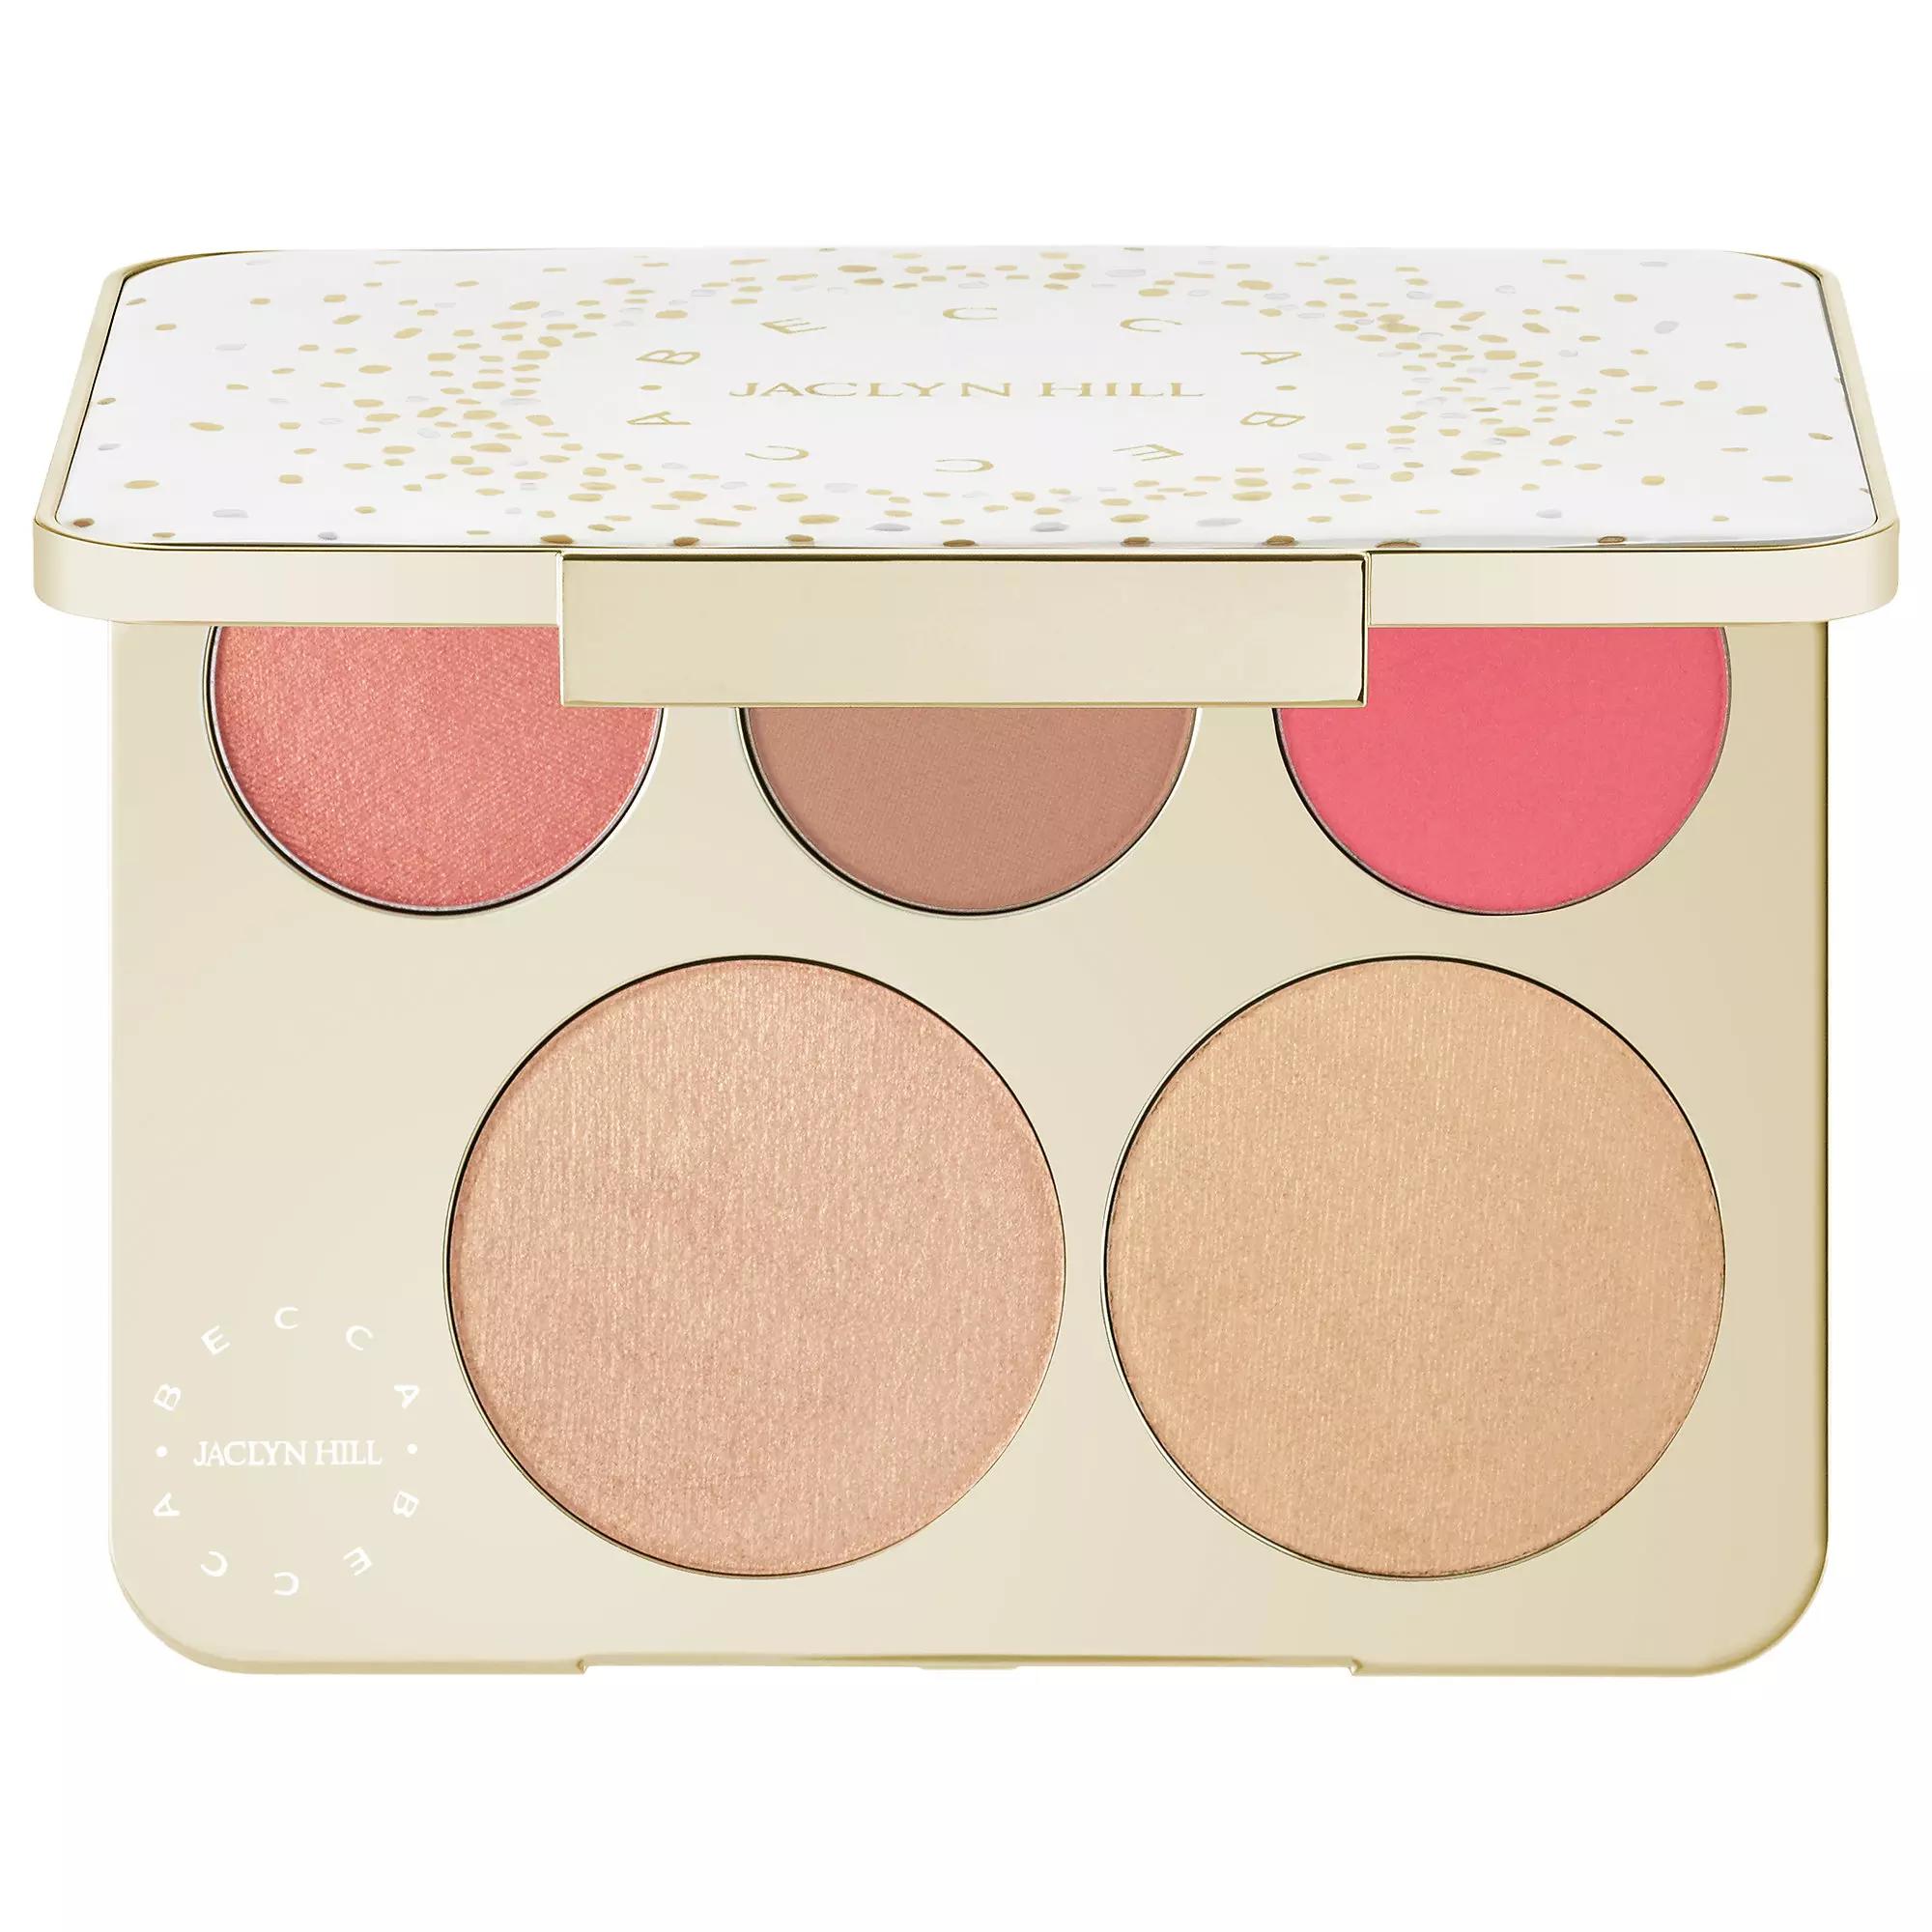 2nd Chance BECCA Face Palette Jaclyn Hill Champagne Collection